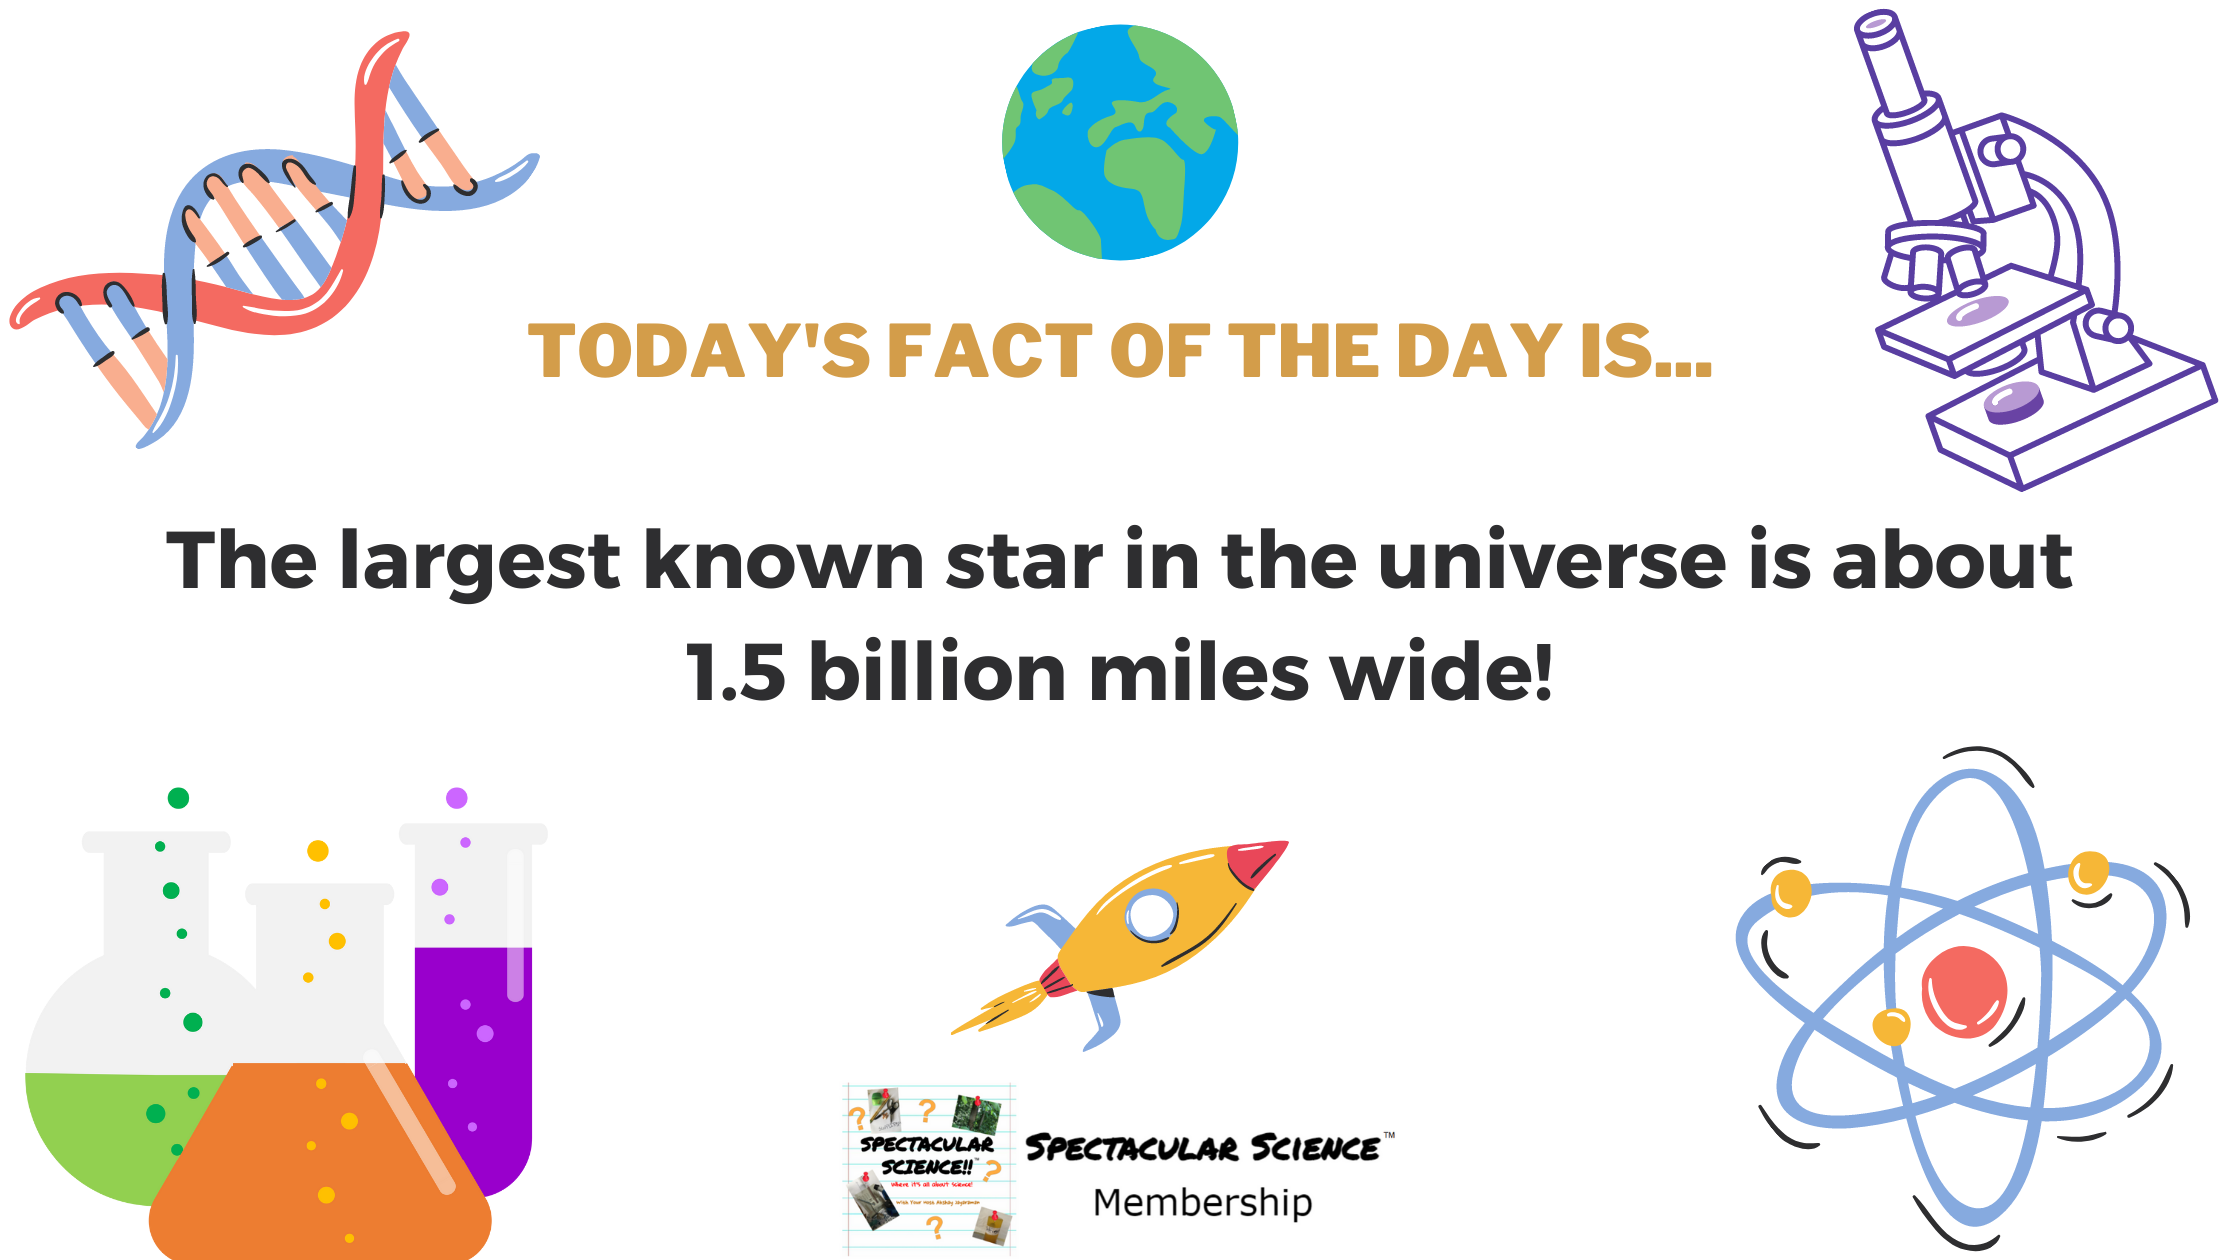 Fact of the Day Image Apr. 29th